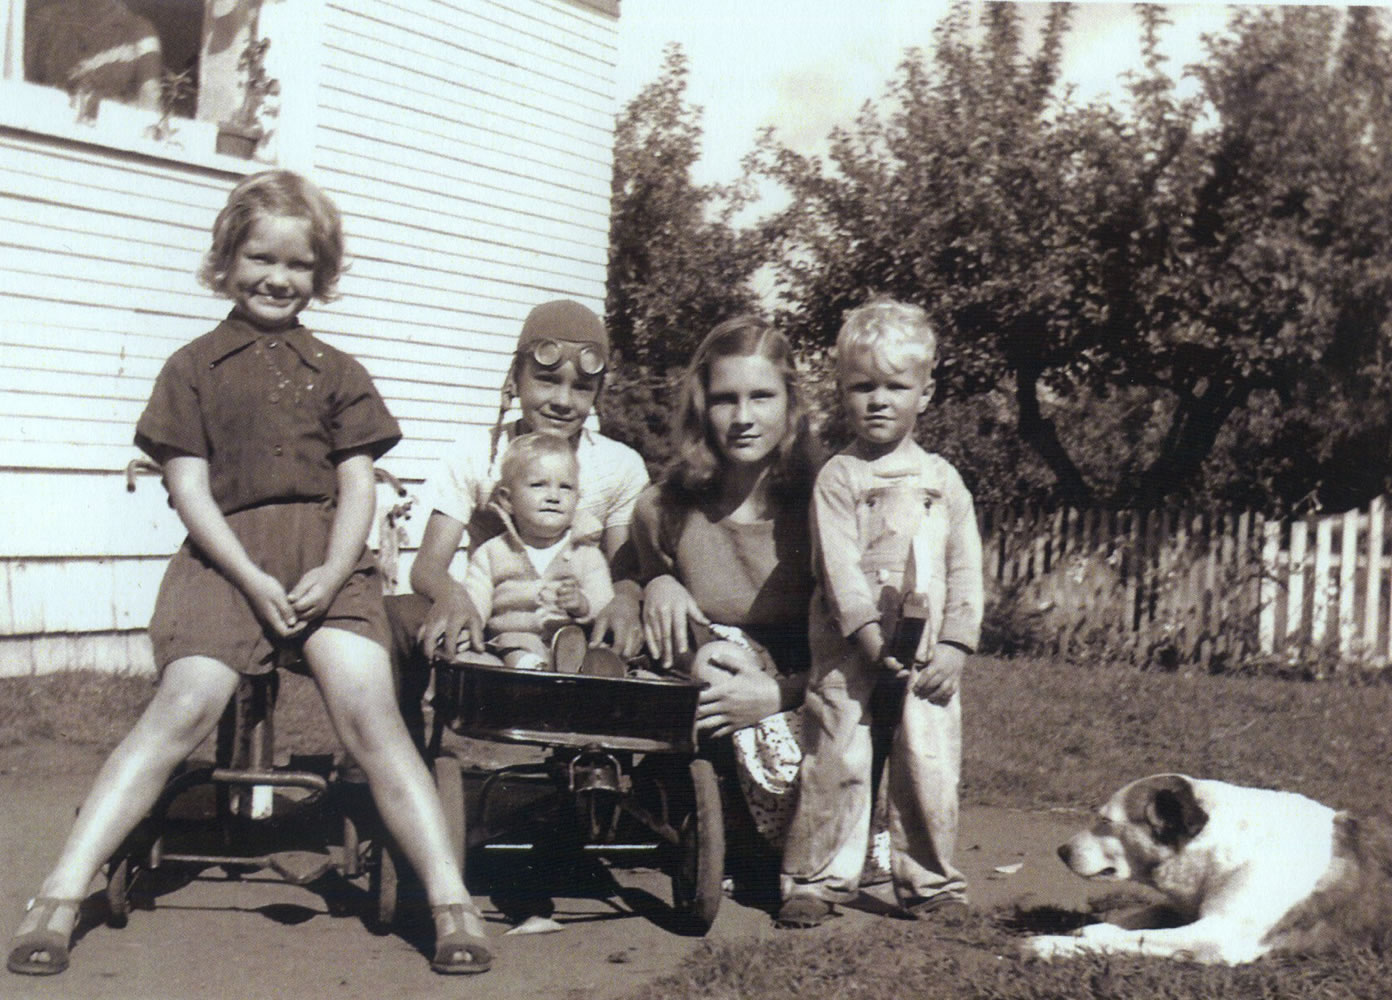 Gwen, from left, Harley (holding Linda), Kay and Dennis Hall, with Spot.